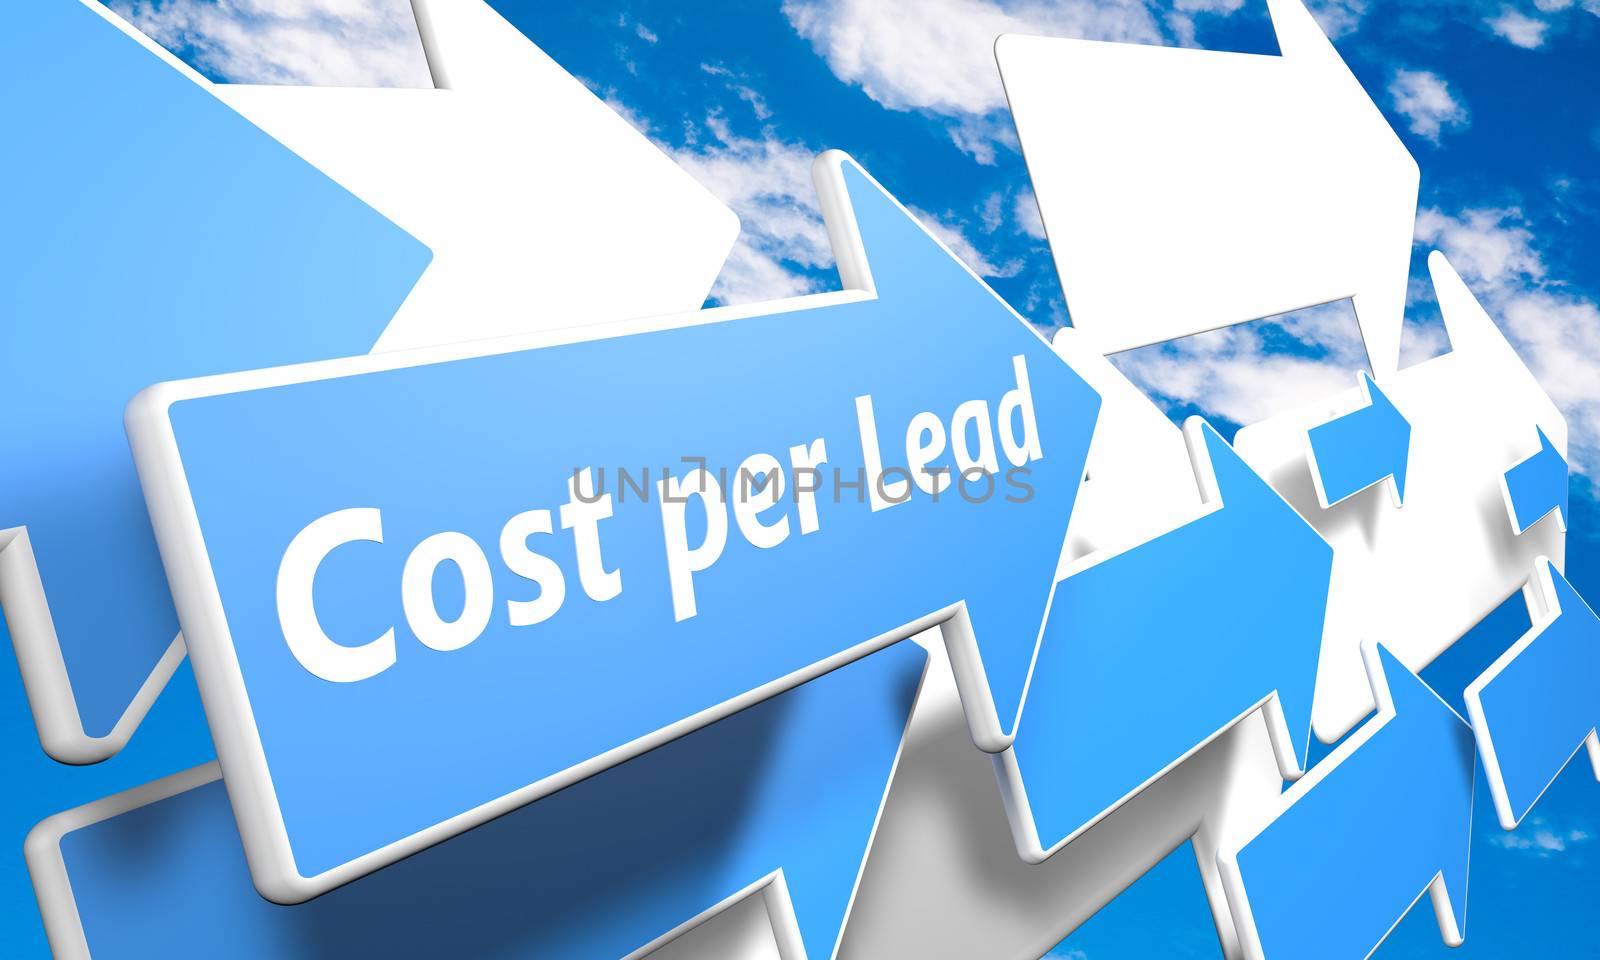 Cost per Lead 3d render concept with blue and white arrows flying in a blue sky with clouds